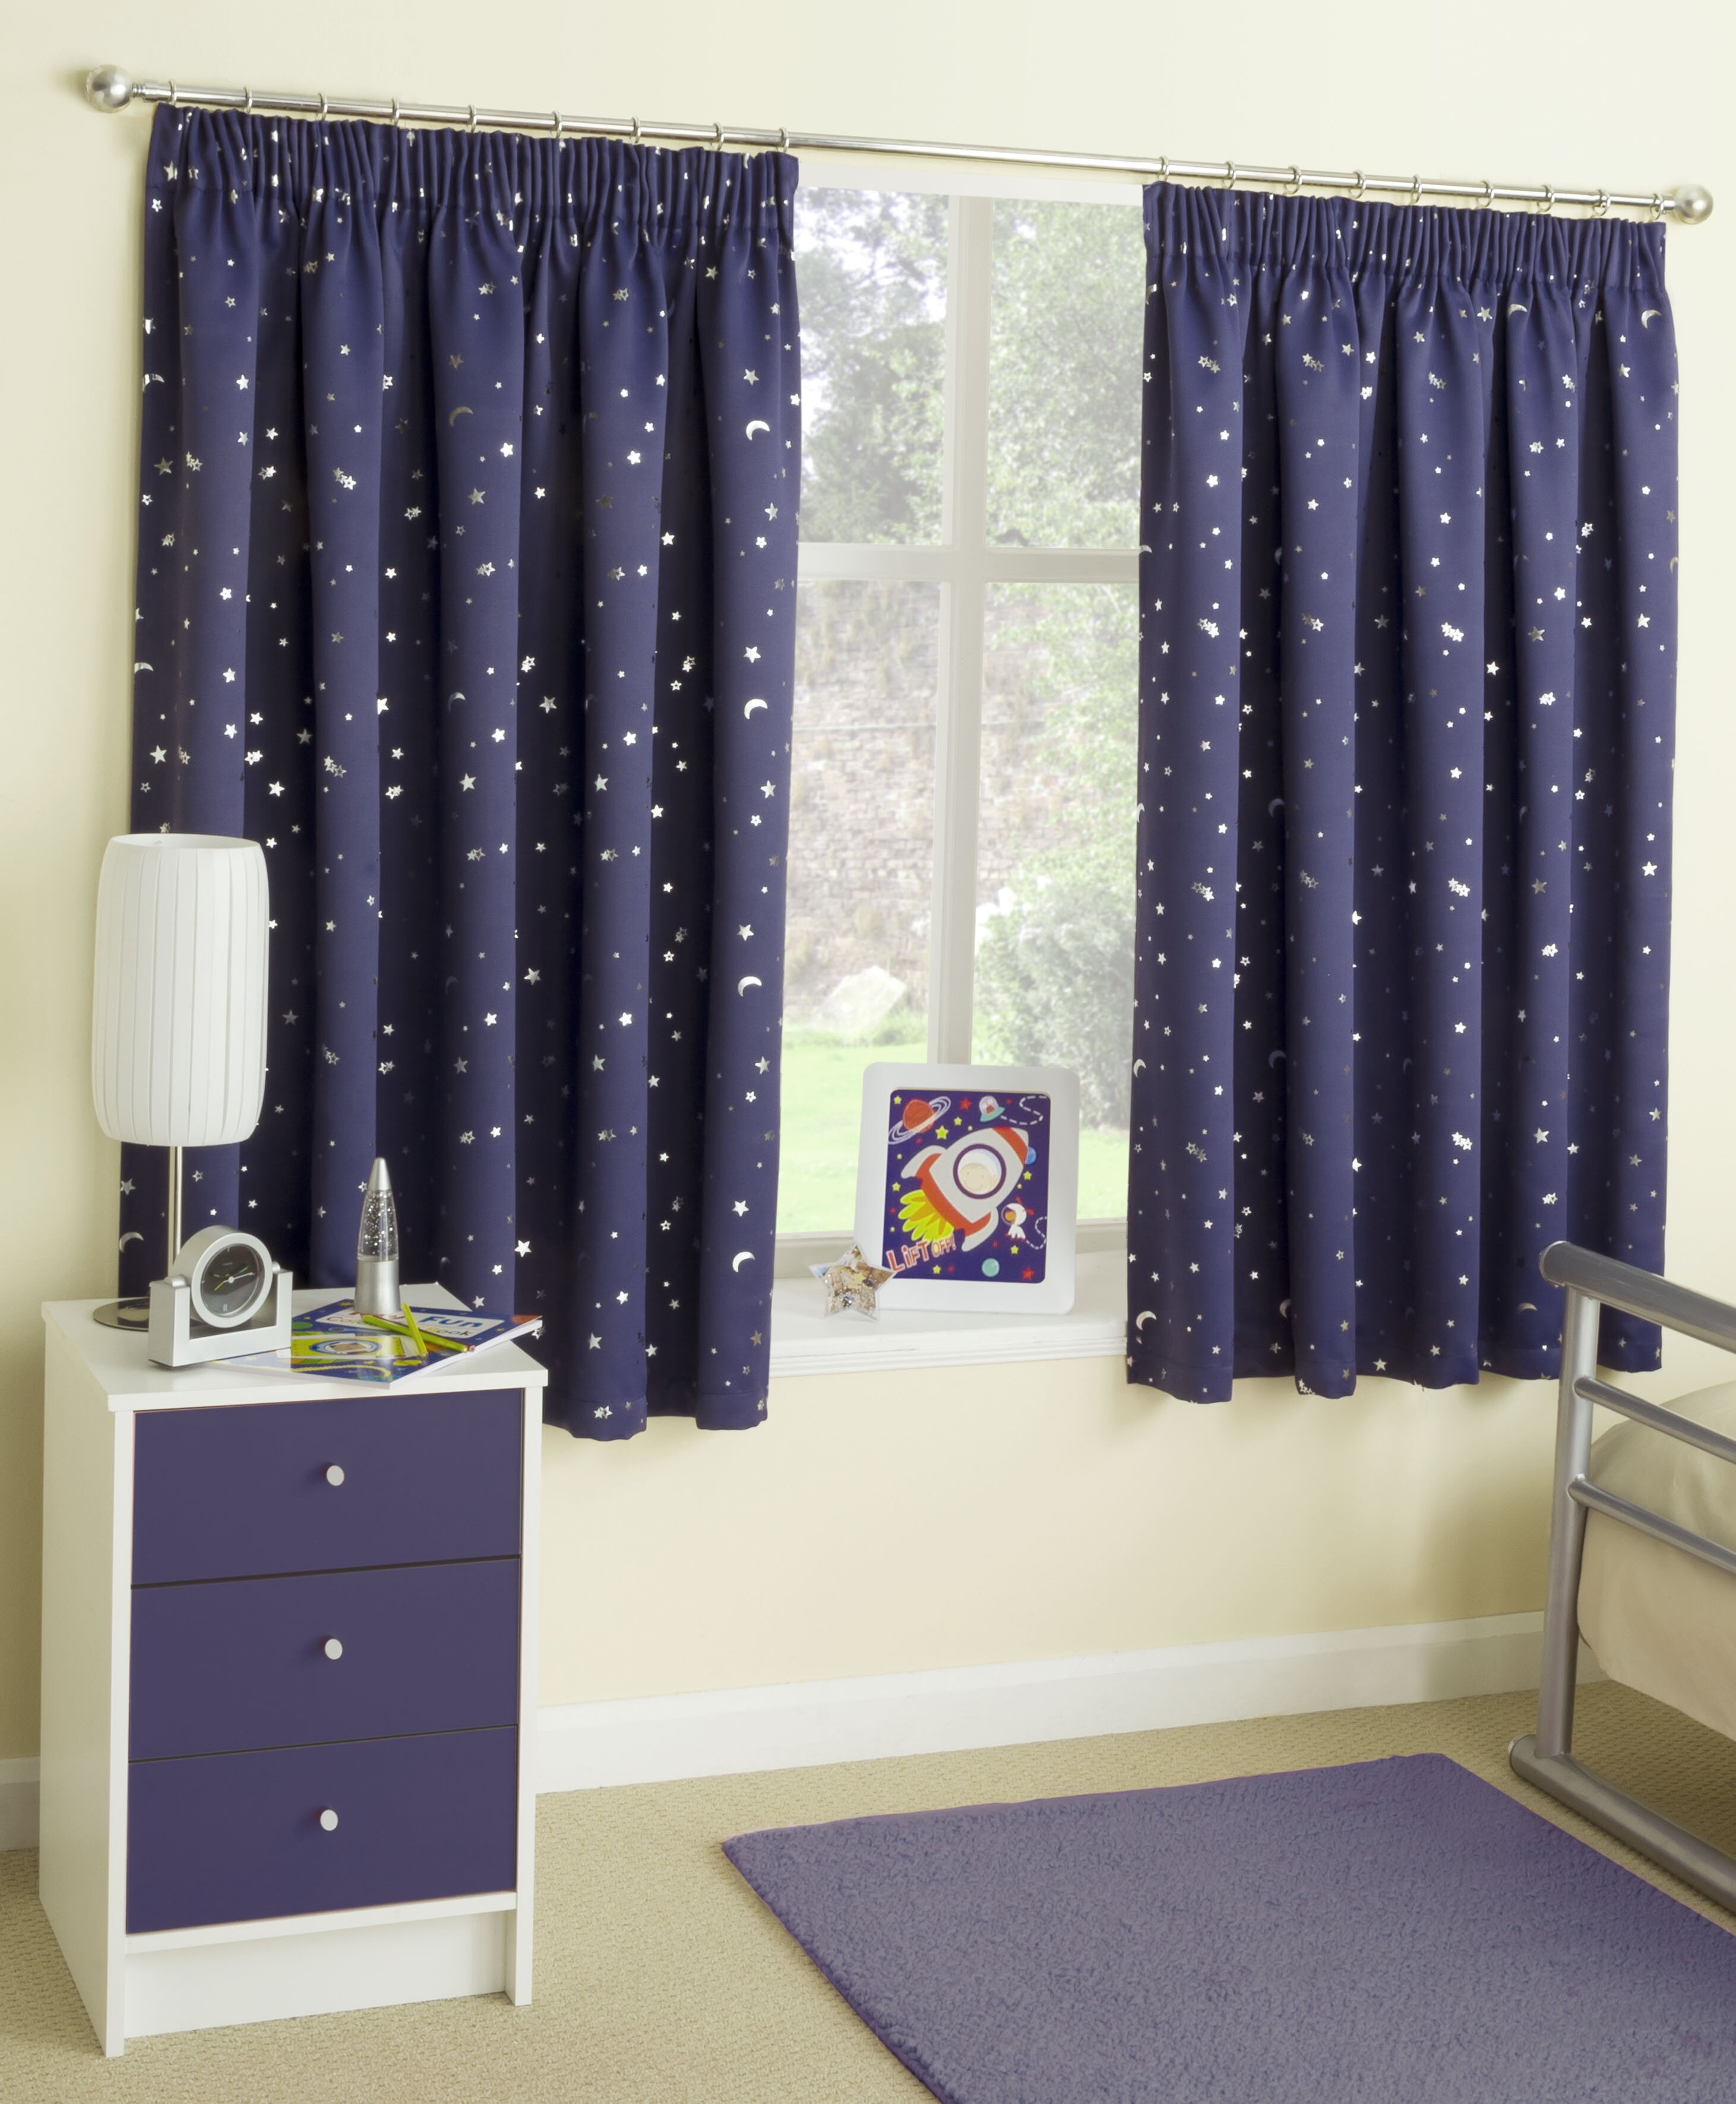 Bedroom Curtains Blackout | Thick Blackout Curtains | Cheap Blackout Curtains